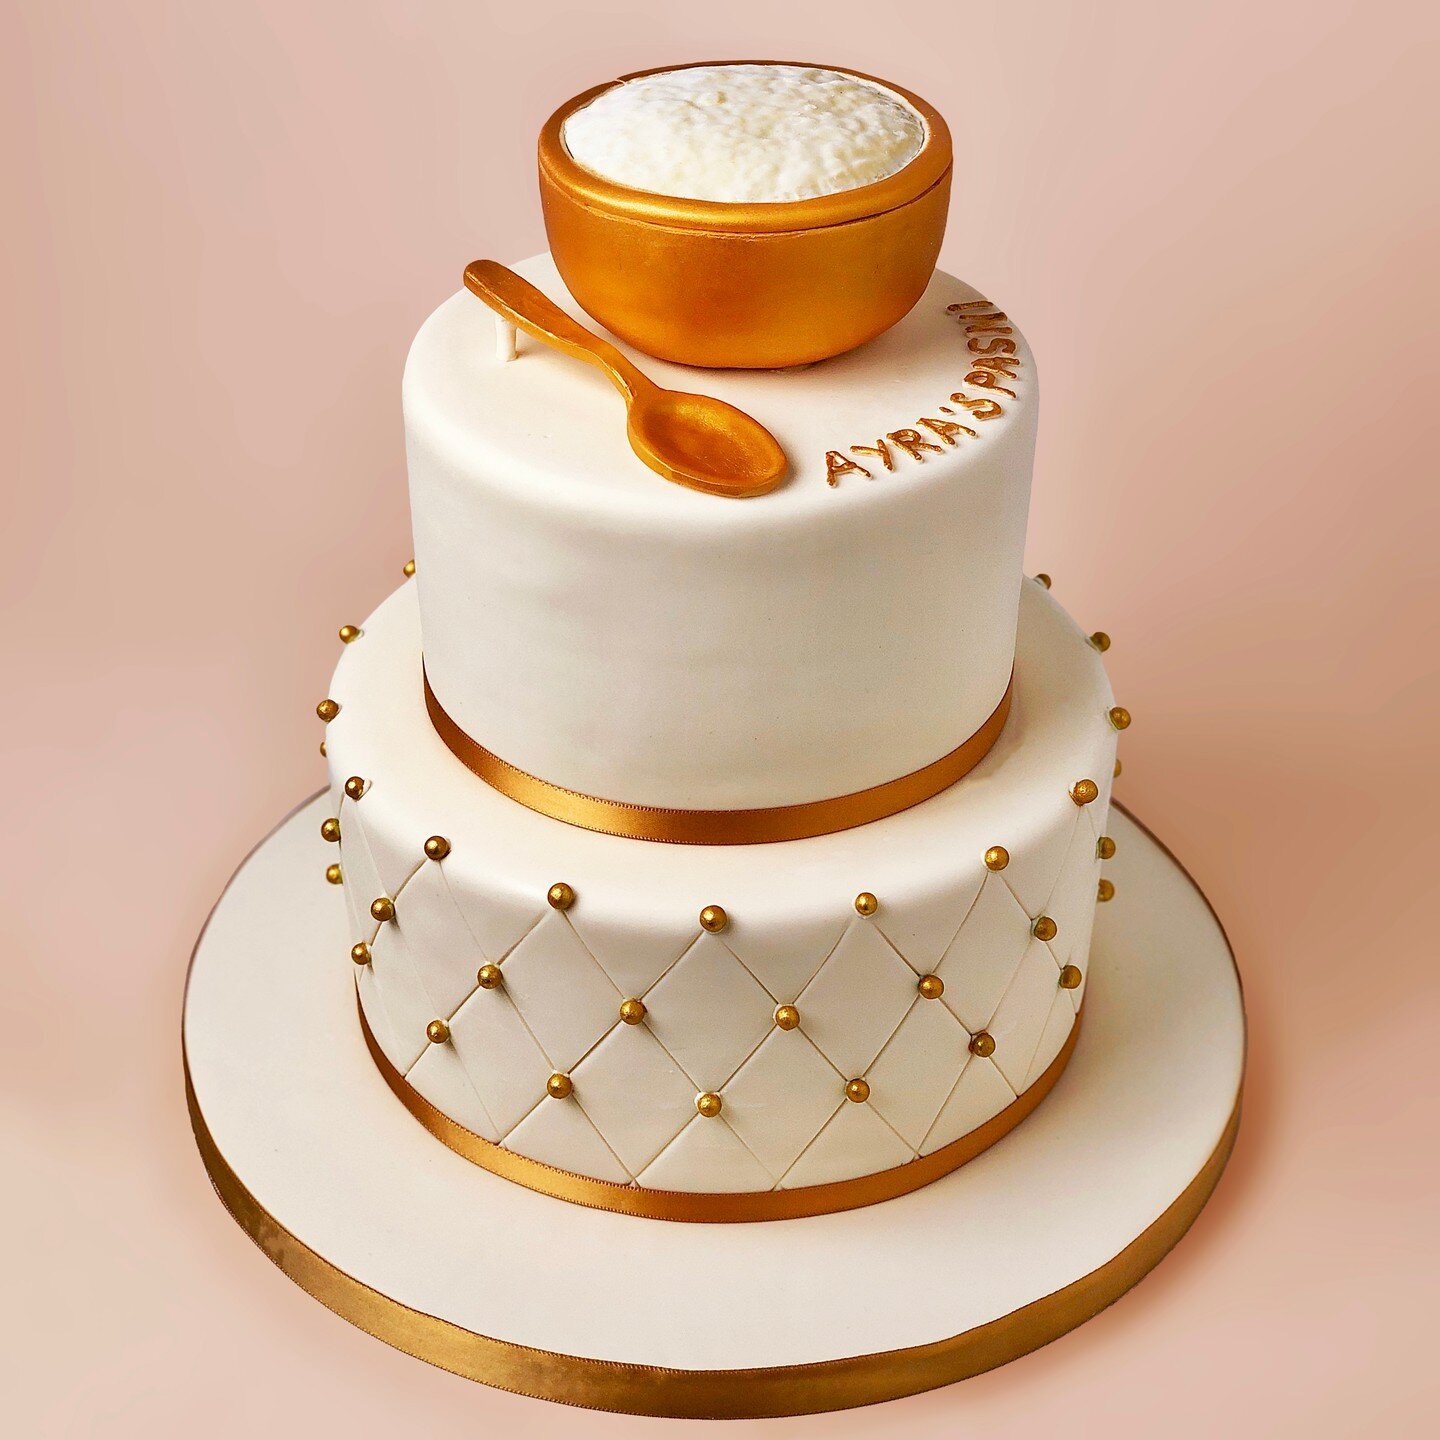 Take a look at this beautiful cake for a child's first rice eating ceremony. Complete with sculpted rice bowl, spoon, and gold accents. 

#annaprashan #firstrice #cake #sculptedcake #charmcitycakes #cakeart #aceofcakes